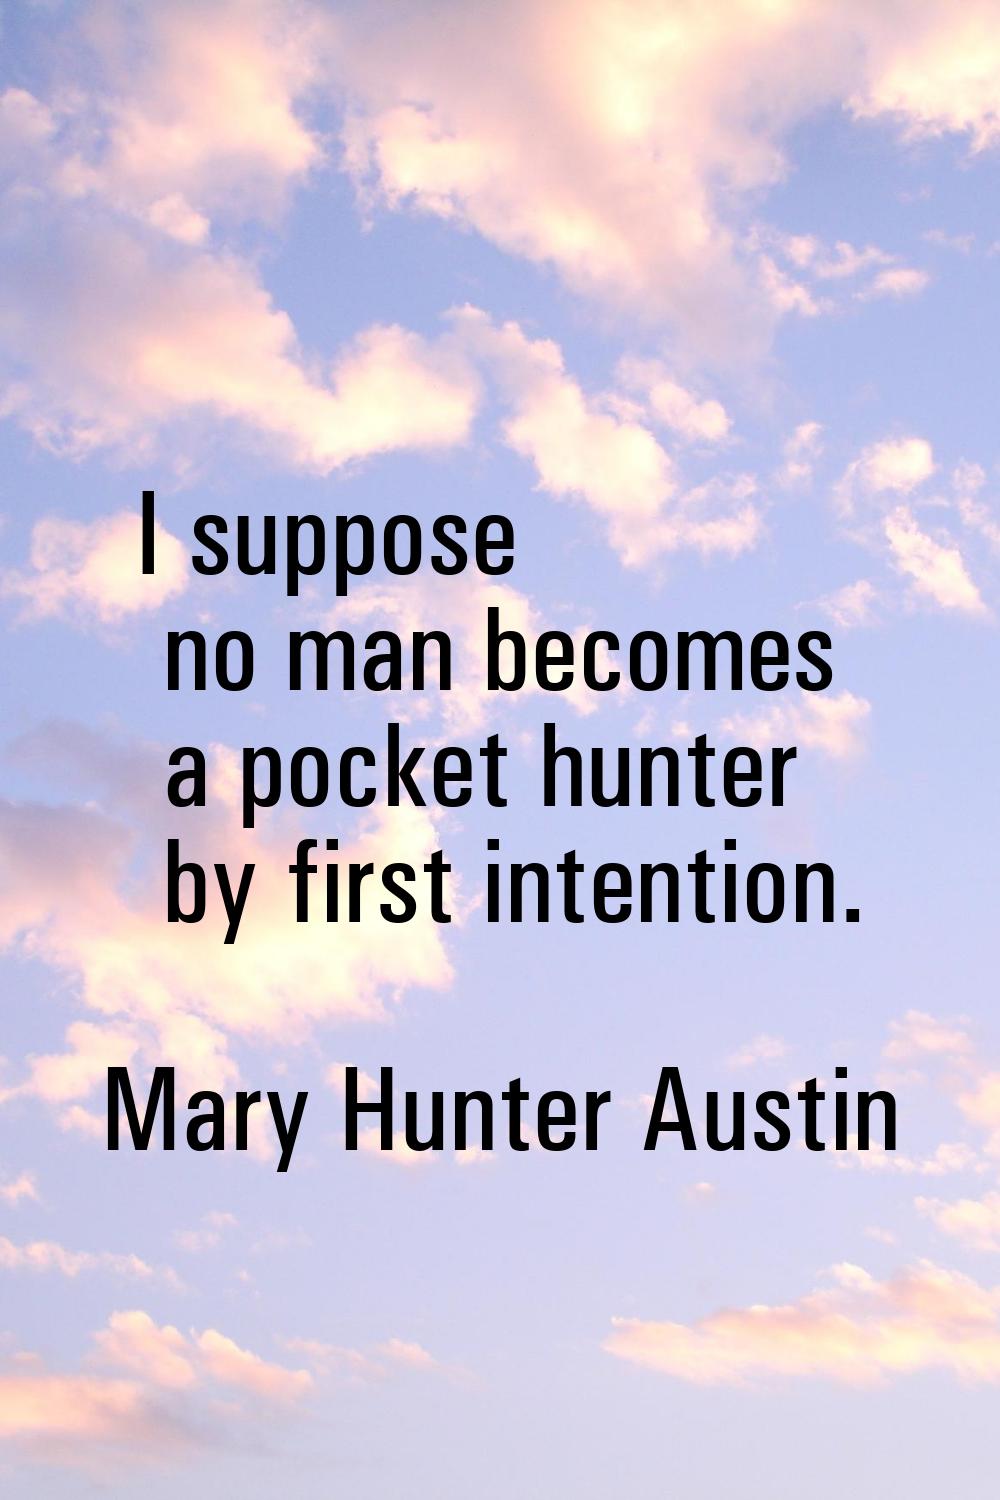 I suppose no man becomes a pocket hunter by first intention.